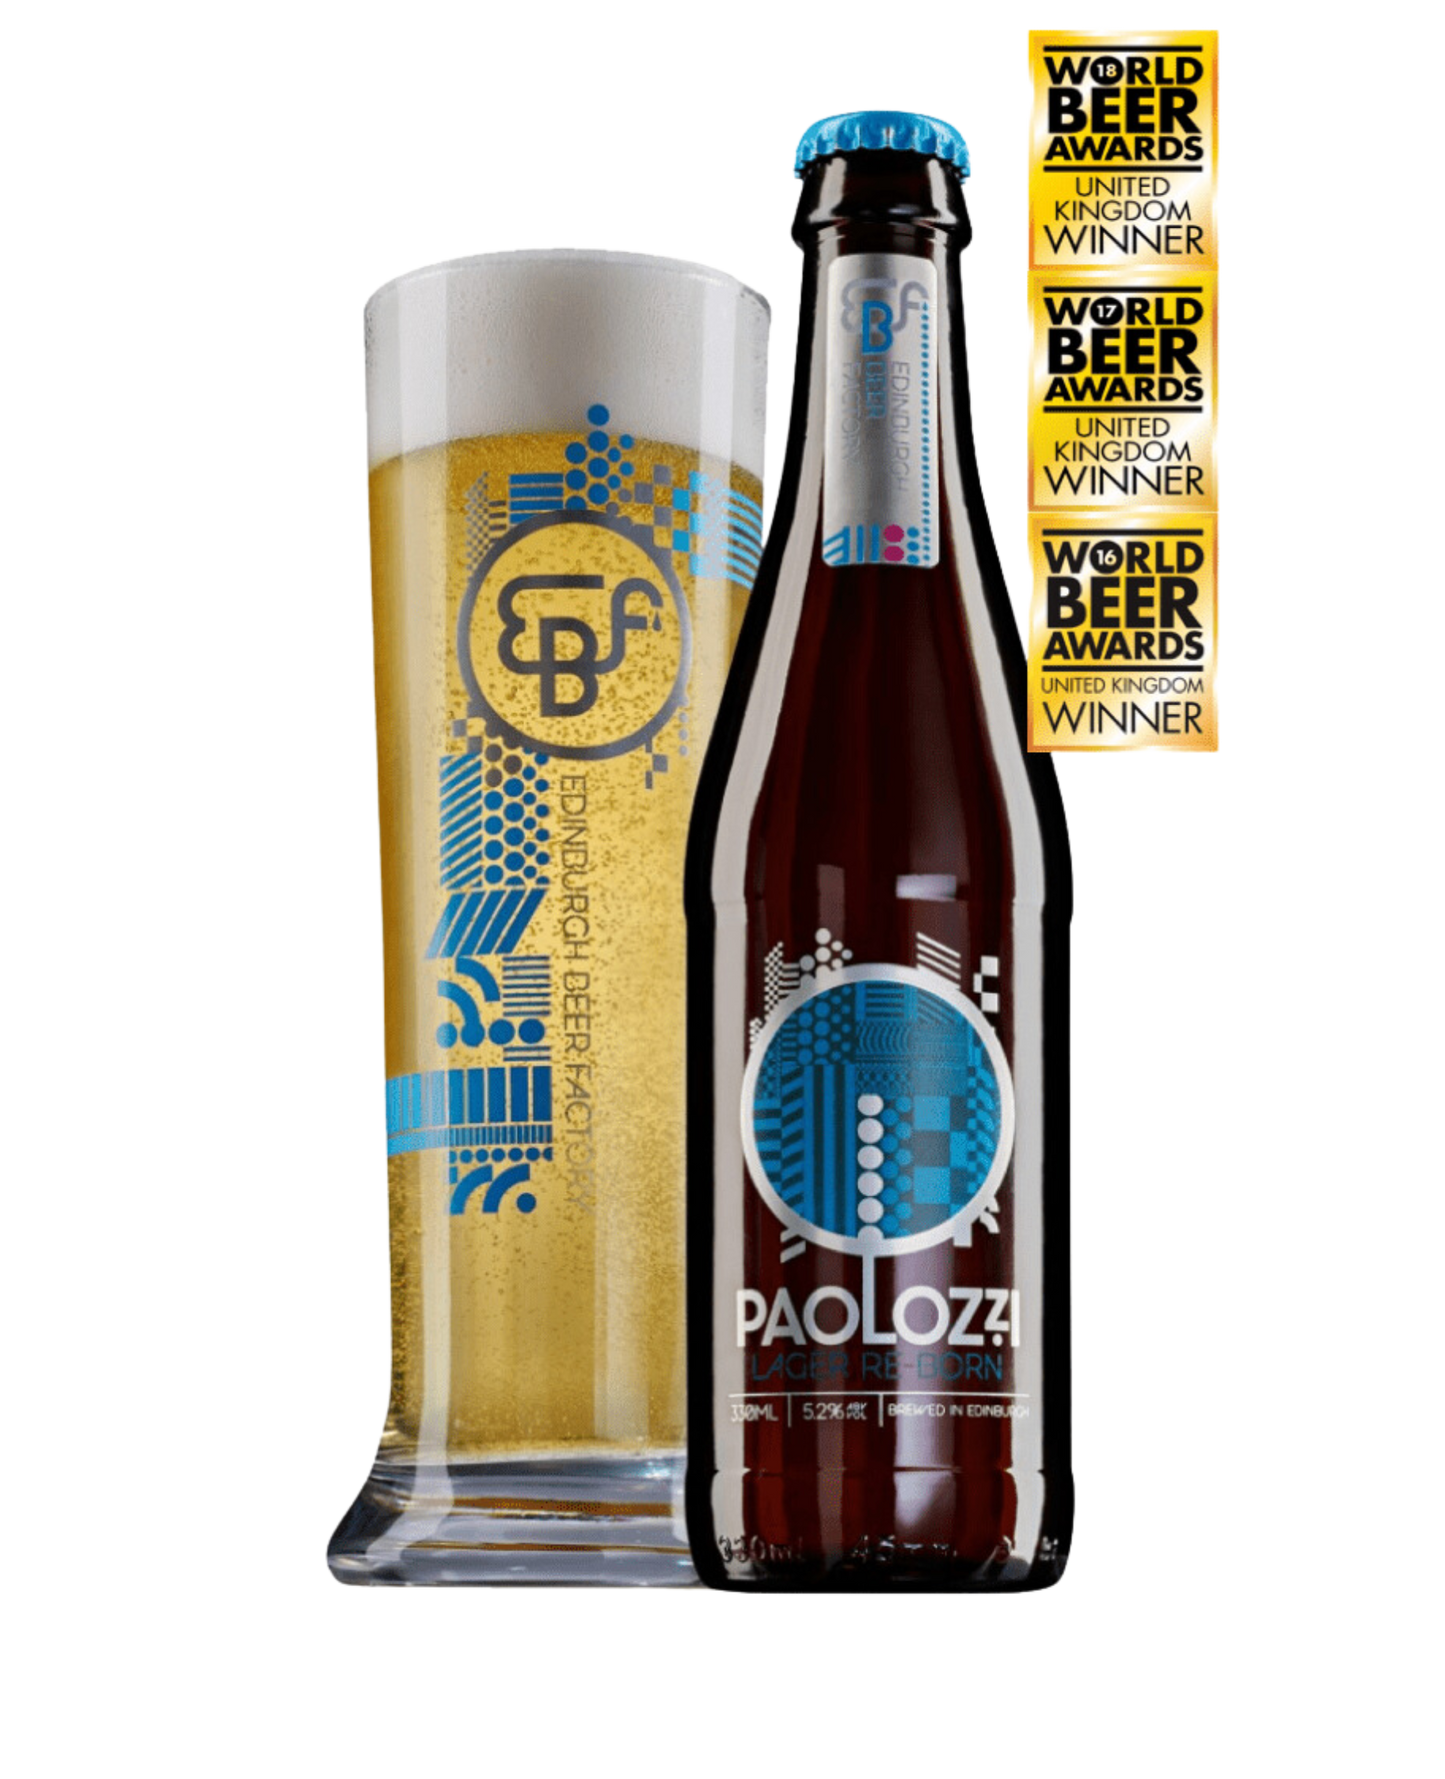 Edinburgh Beer Factory's Paolozzi Lager